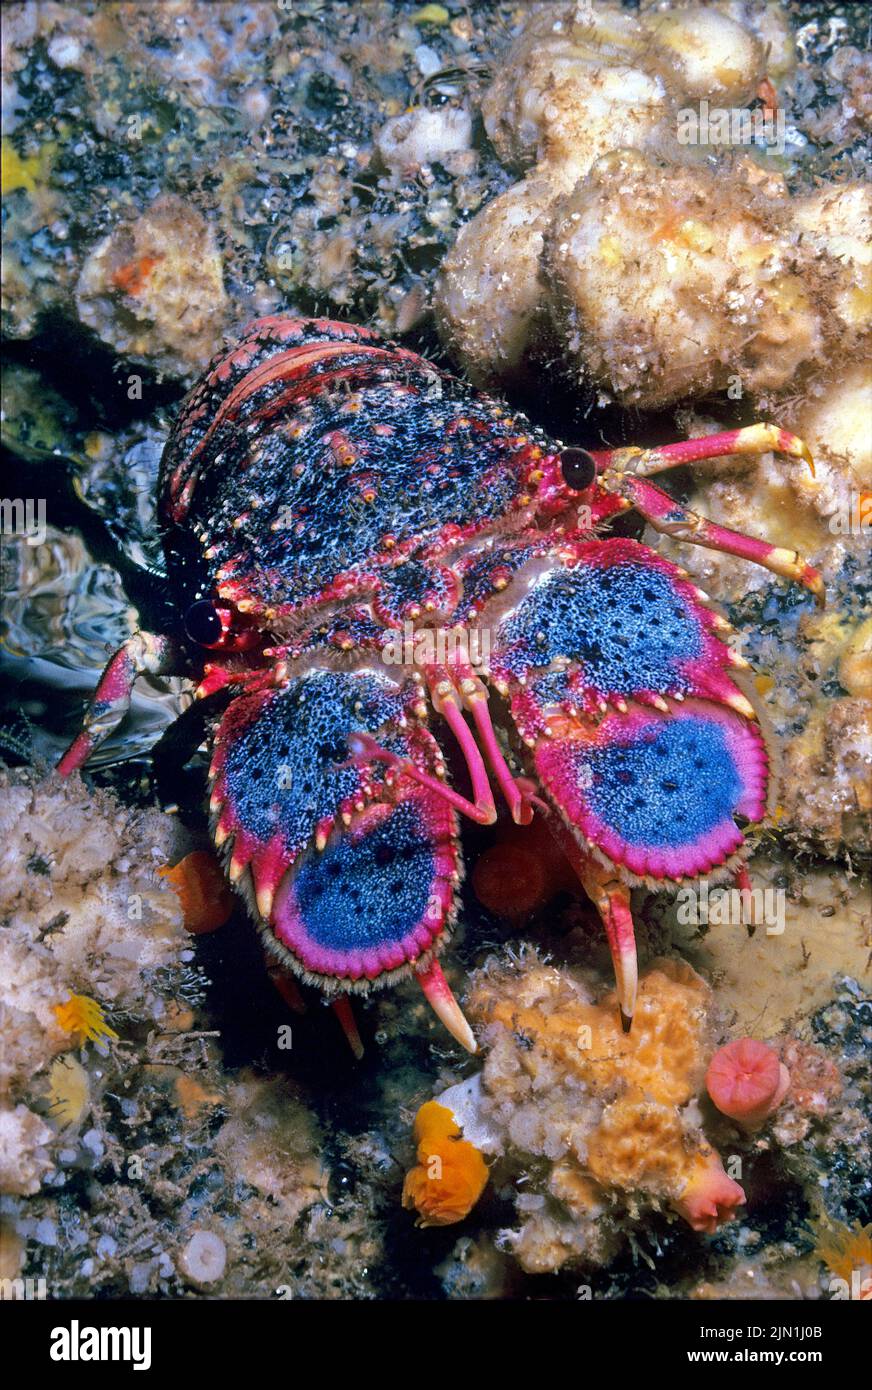 Royal Spanish Lobster (Arctides regalis), are also called shovel-nosed lobstersand it is known as ula-papapa in Hawaii, Pacific ocean Stock Photo